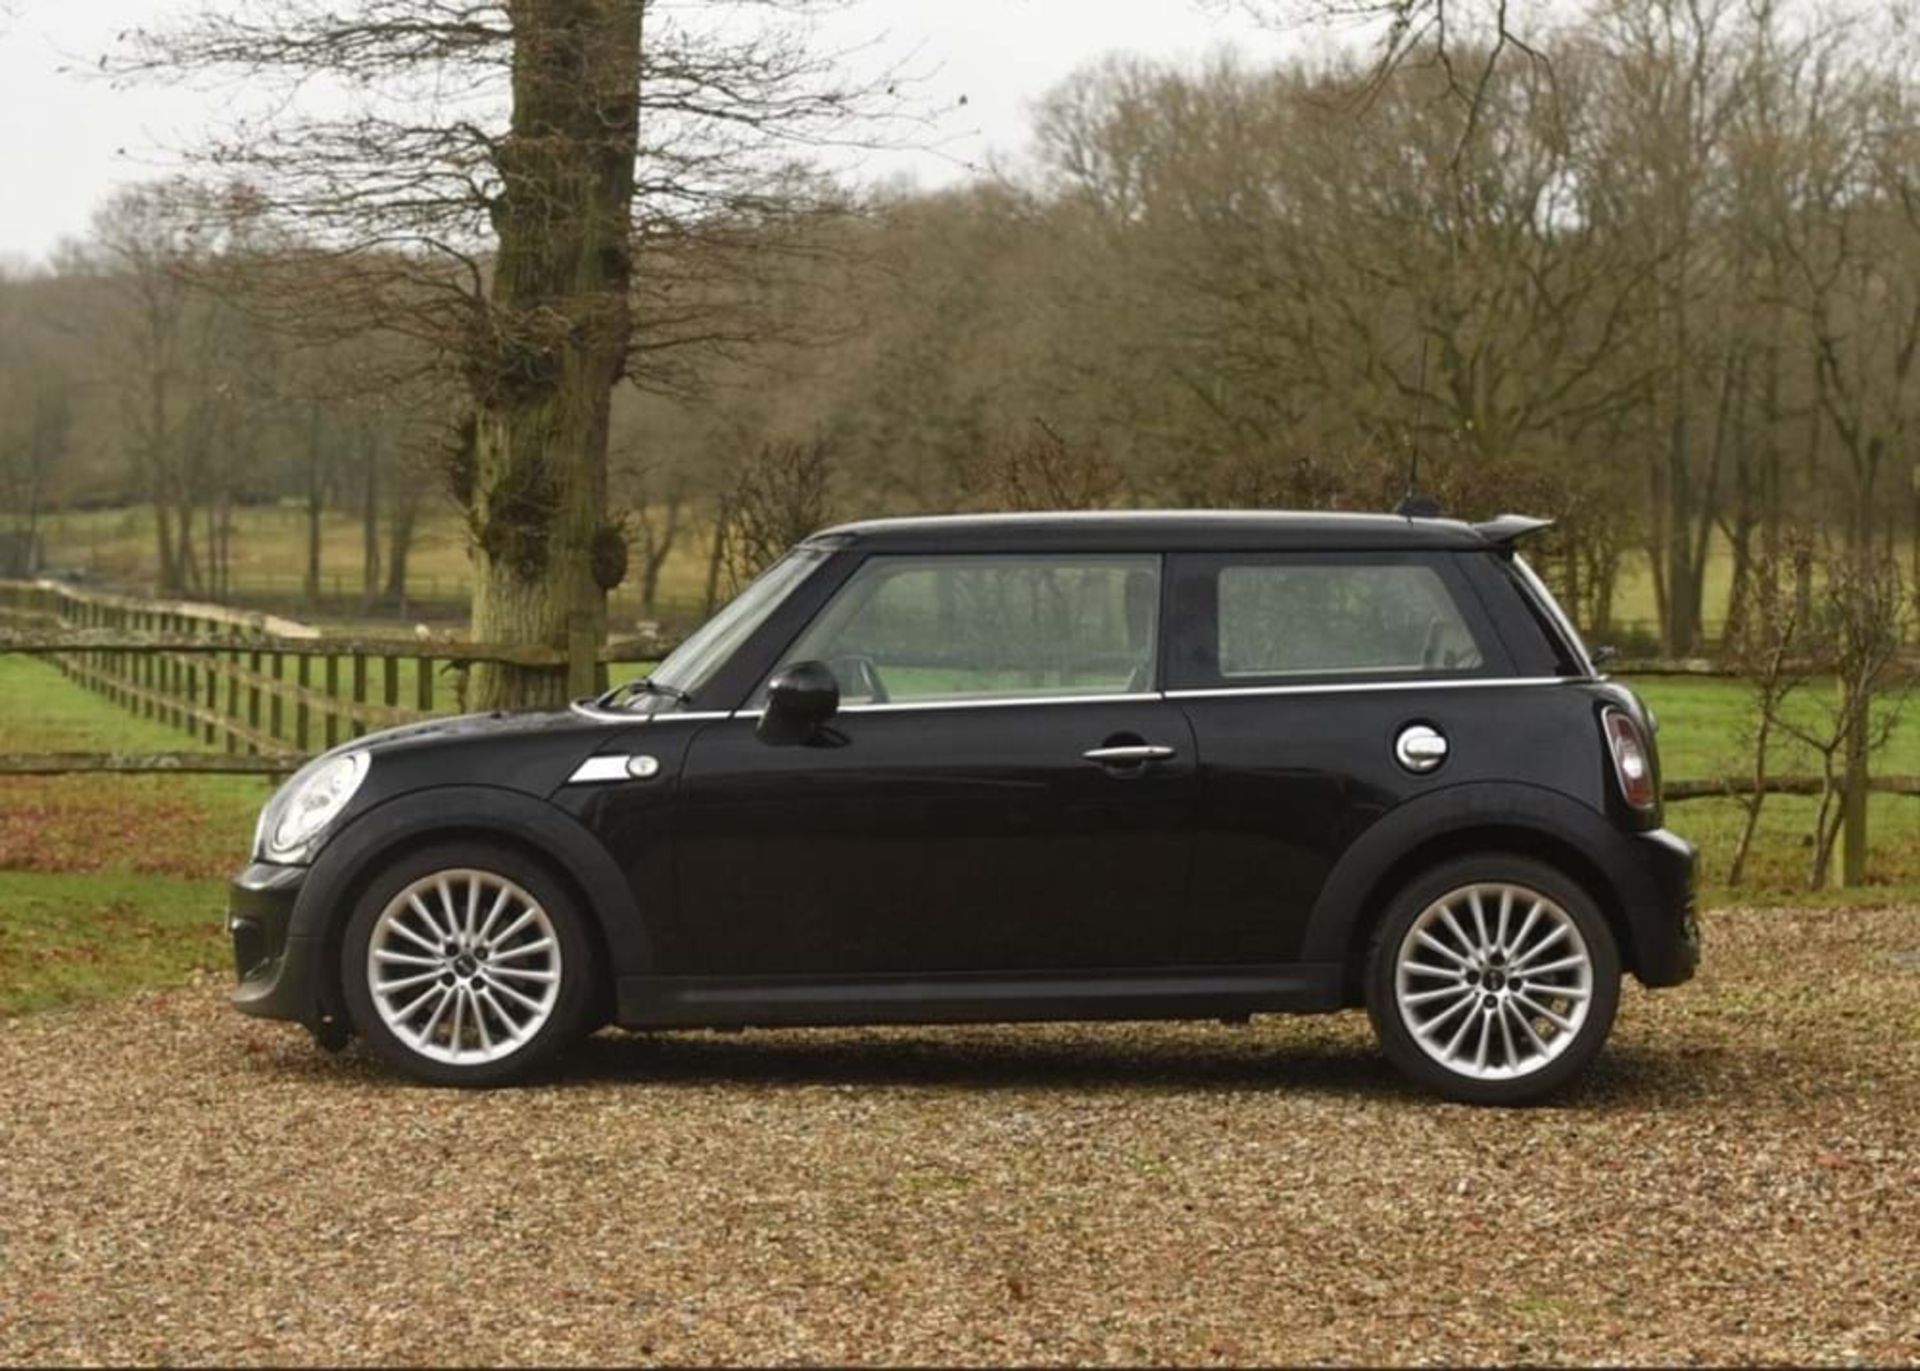 2012 Mini Cooper S Inspired by Goodwood - Image 10 of 10